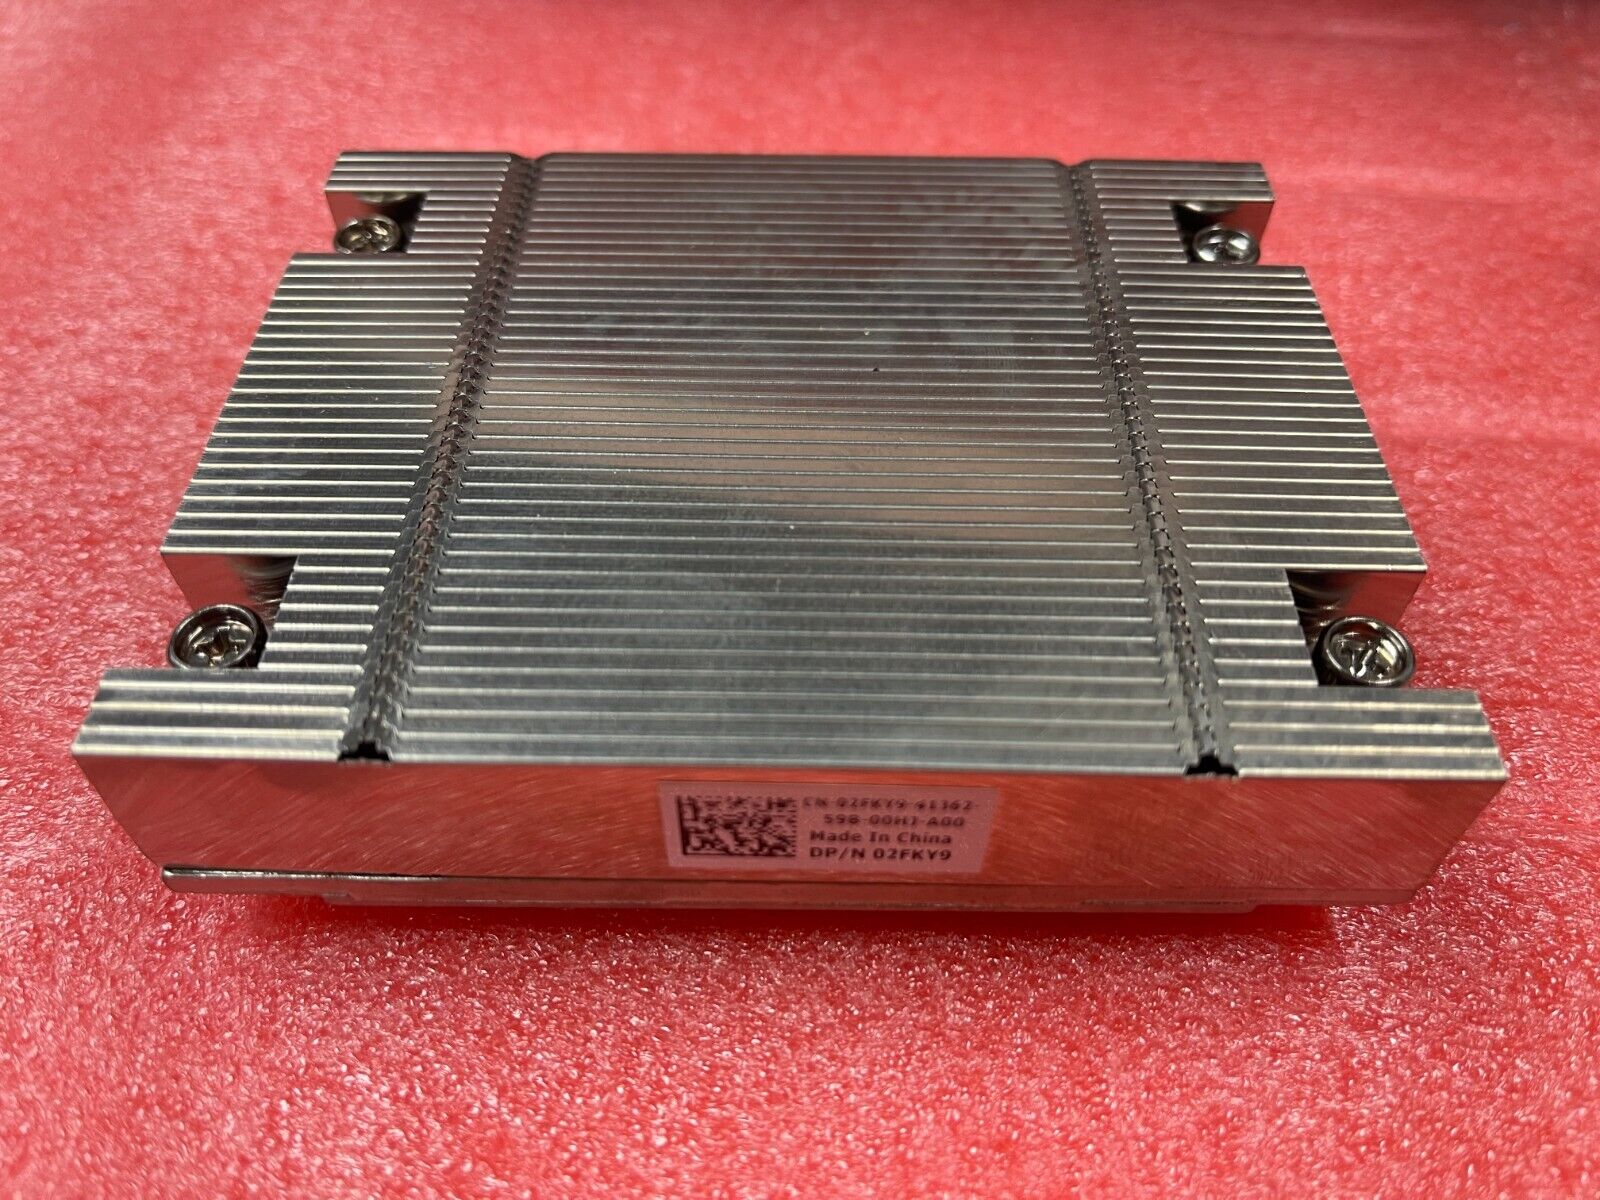 Dell Poweredge R430 CPU Cooling Heatsink 02FKY9 2FKY9